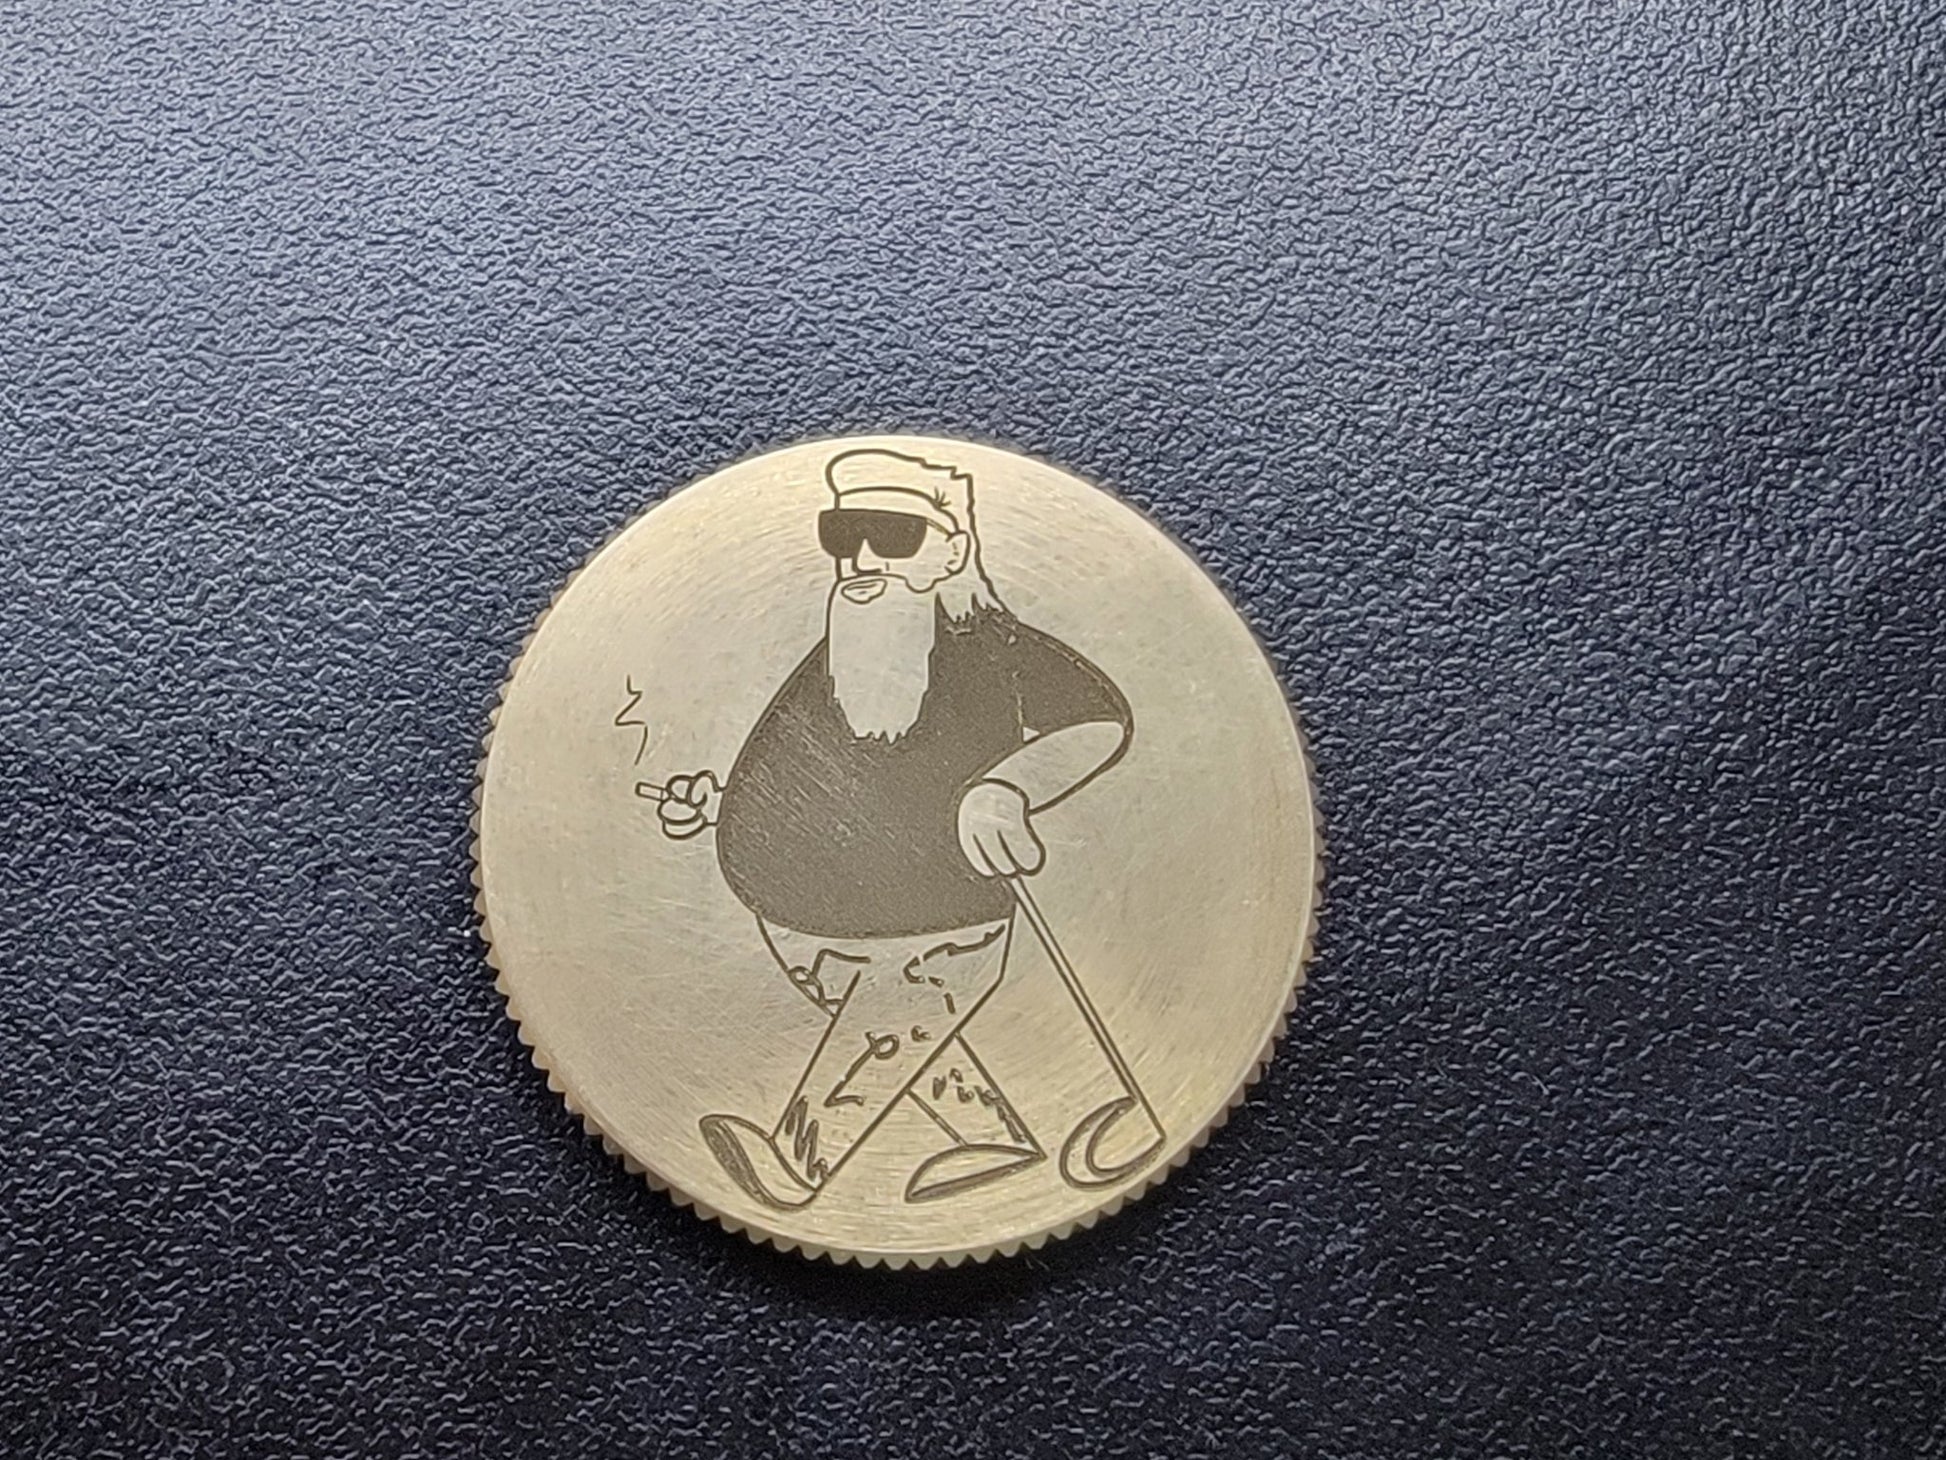 The "JD" CNC Machined Laser Engraved Solid Brass Golf Ball Marker - River Valley Laser Works